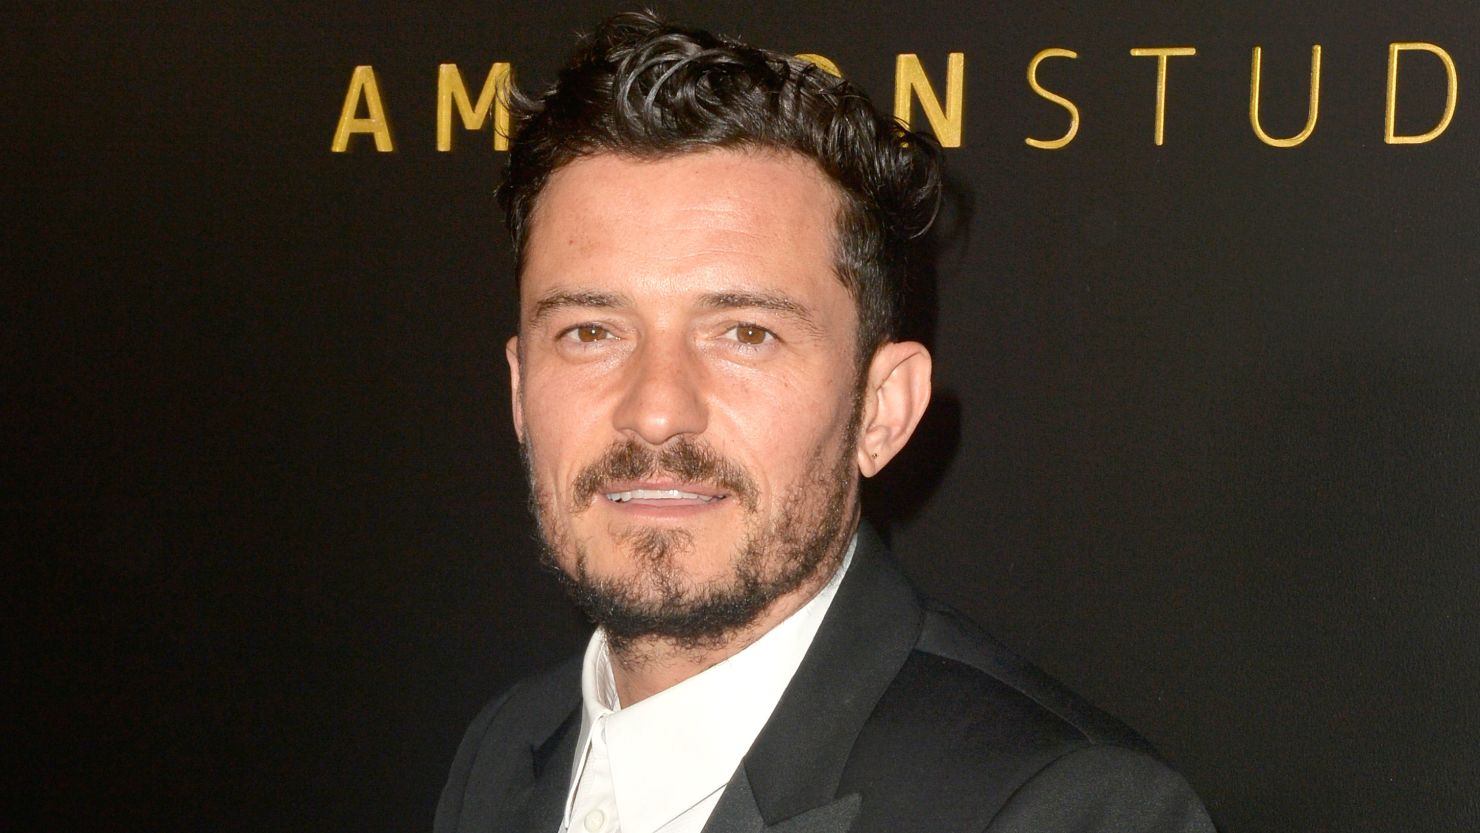 Orlando Bloom attends the Amazon Studios Golden Globes after party in January.